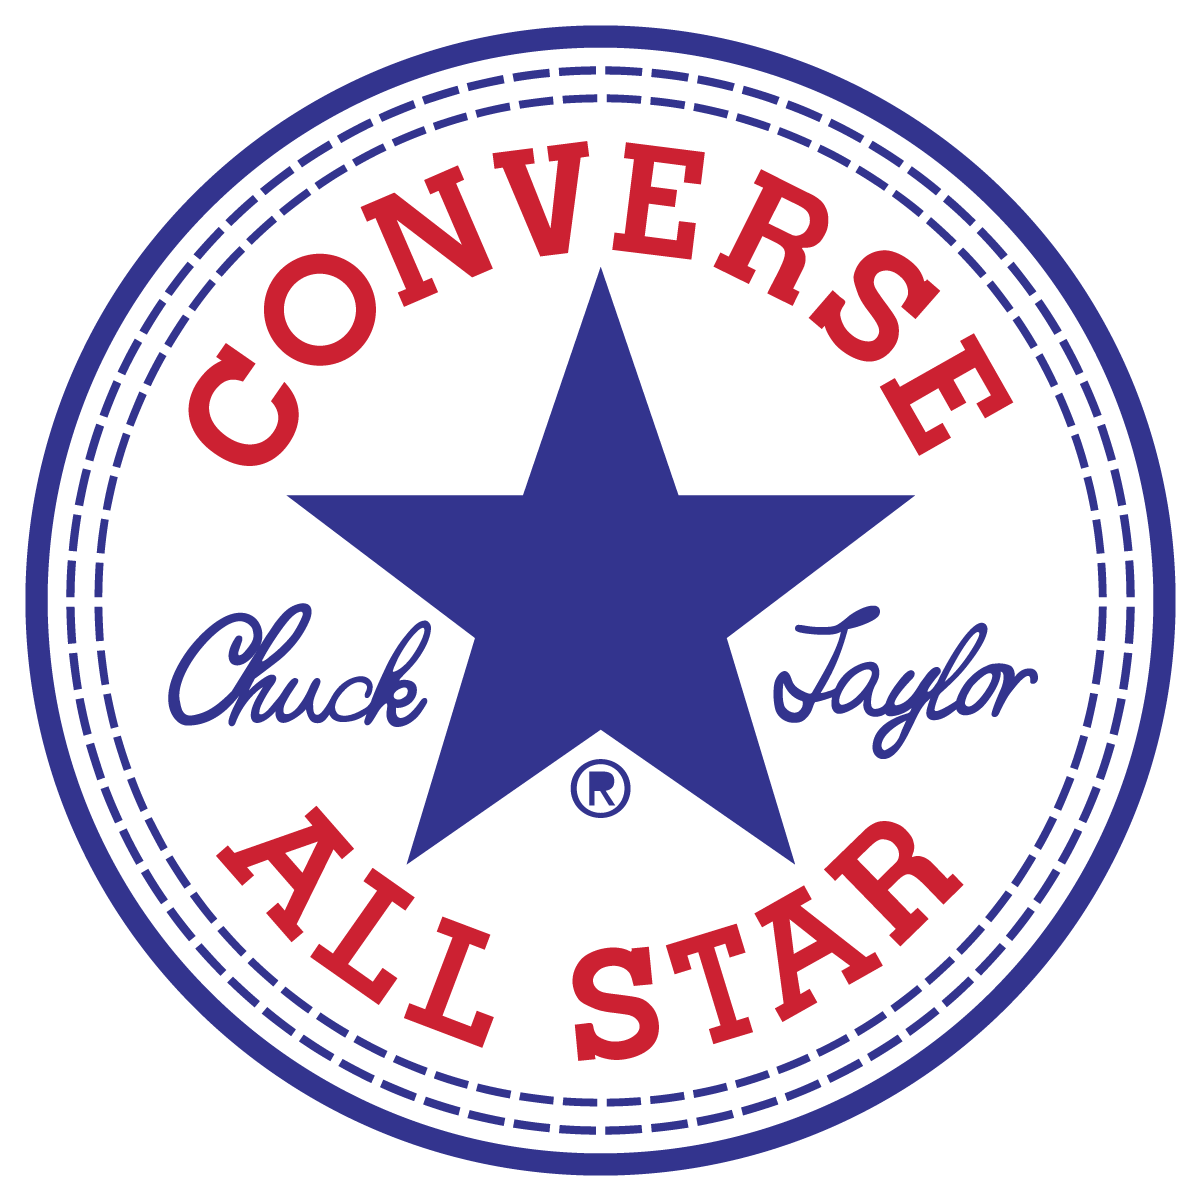 how to draw converse logo